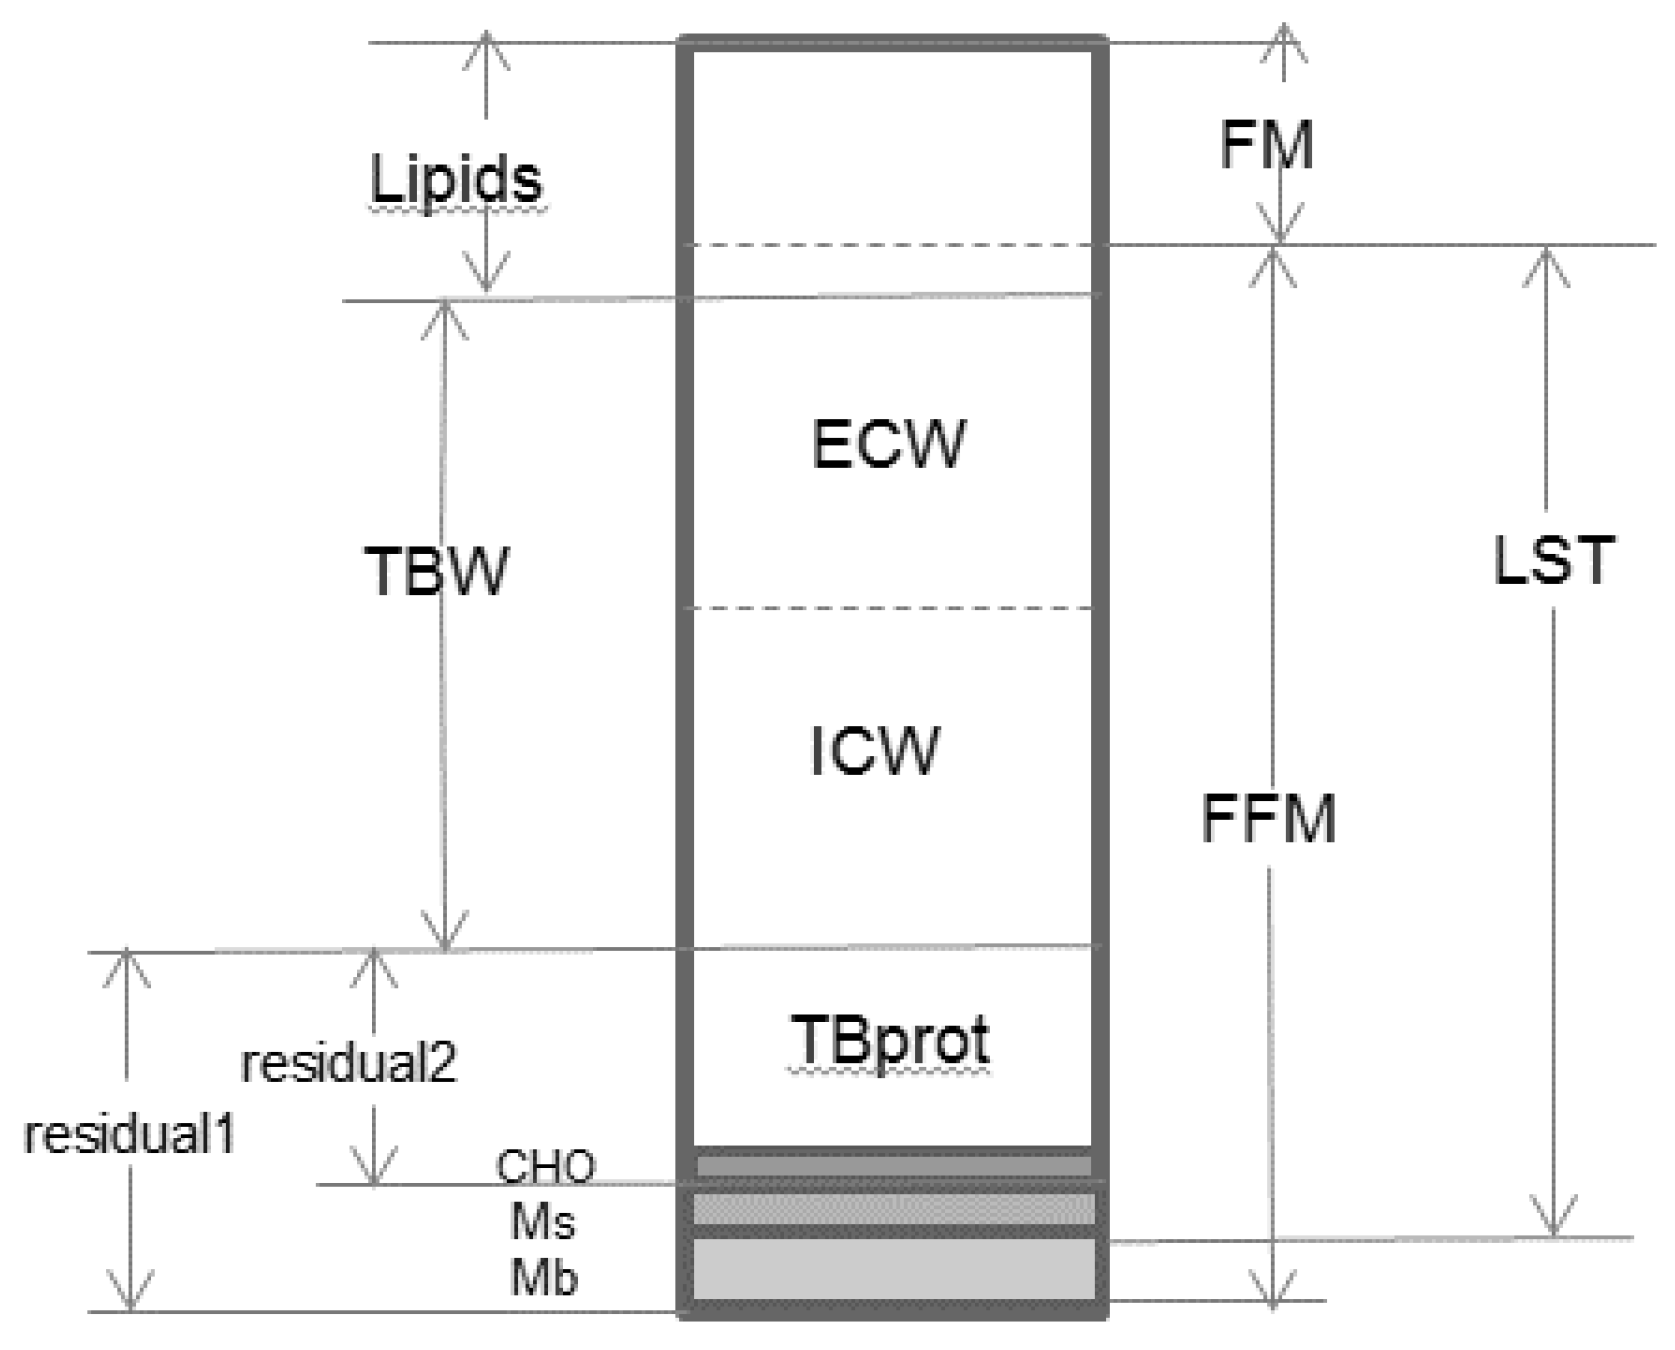 Comparison of Bioelectrical Impedance Vector Analysis (BIVA) to 7